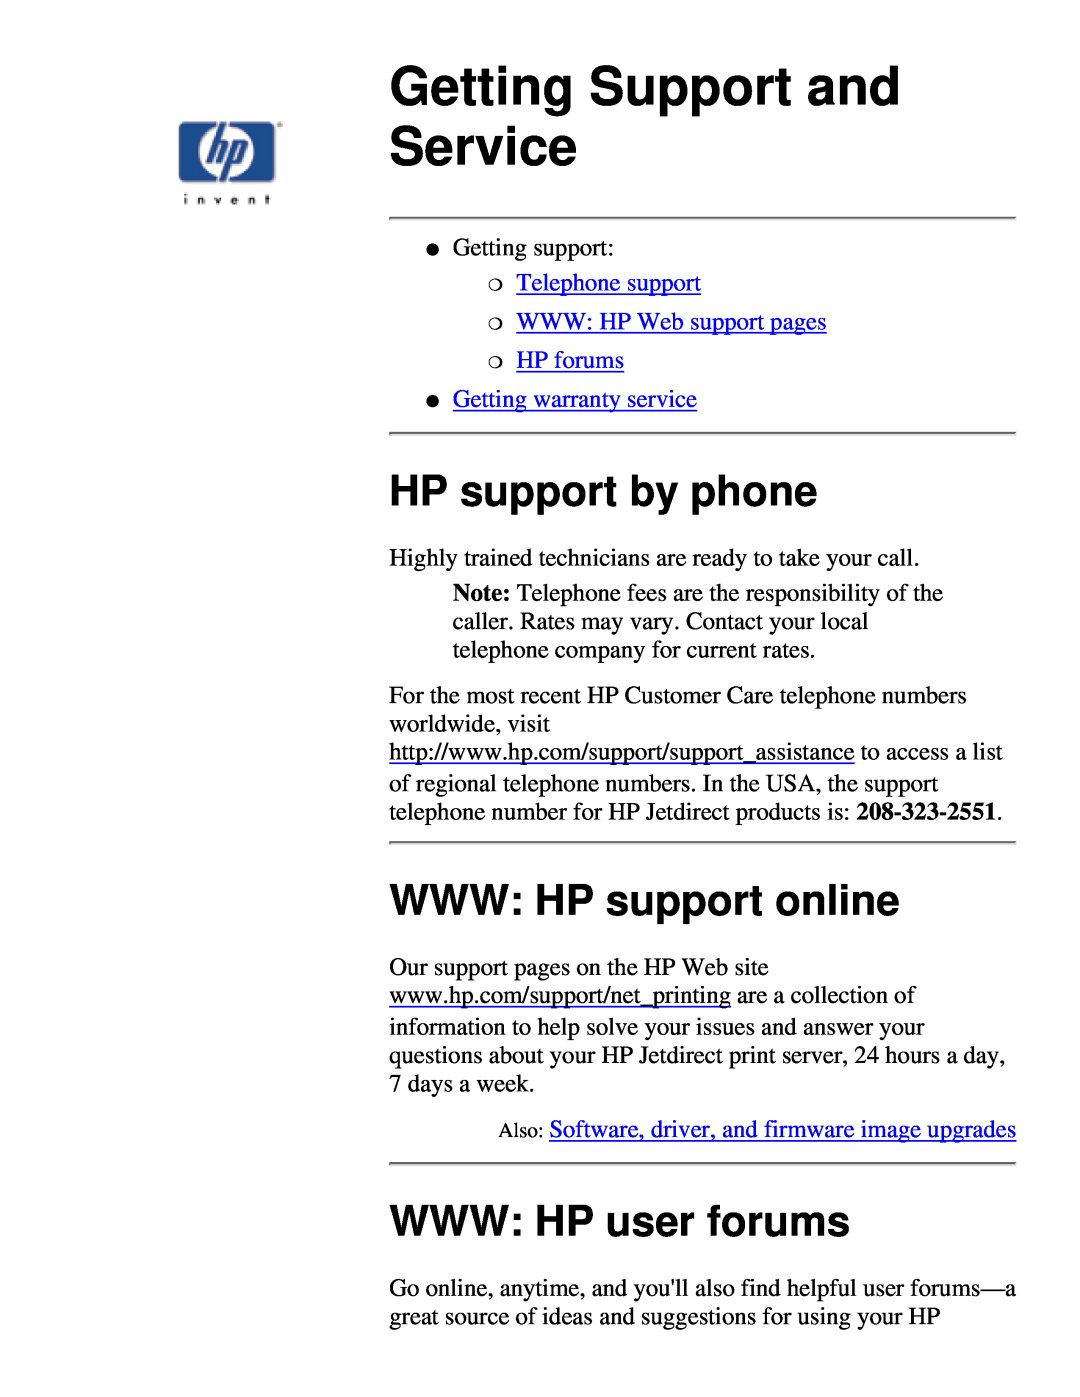 HP 175X, 310X manual Getting Support and Service, HP support by phone, WWW HP support online, WWW HP user forums 